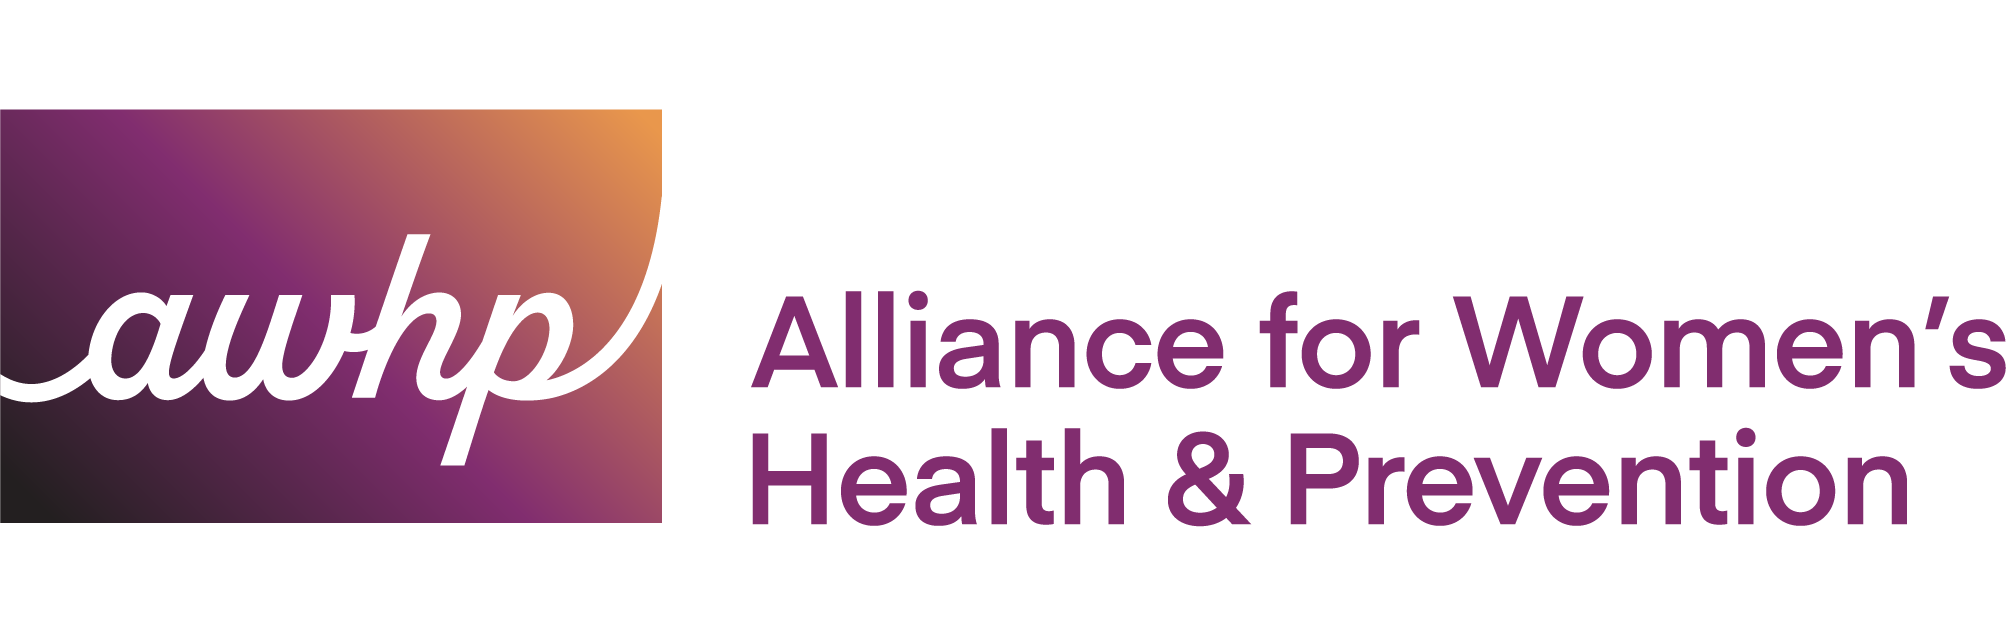 Alliance for Women's Health and Prevention